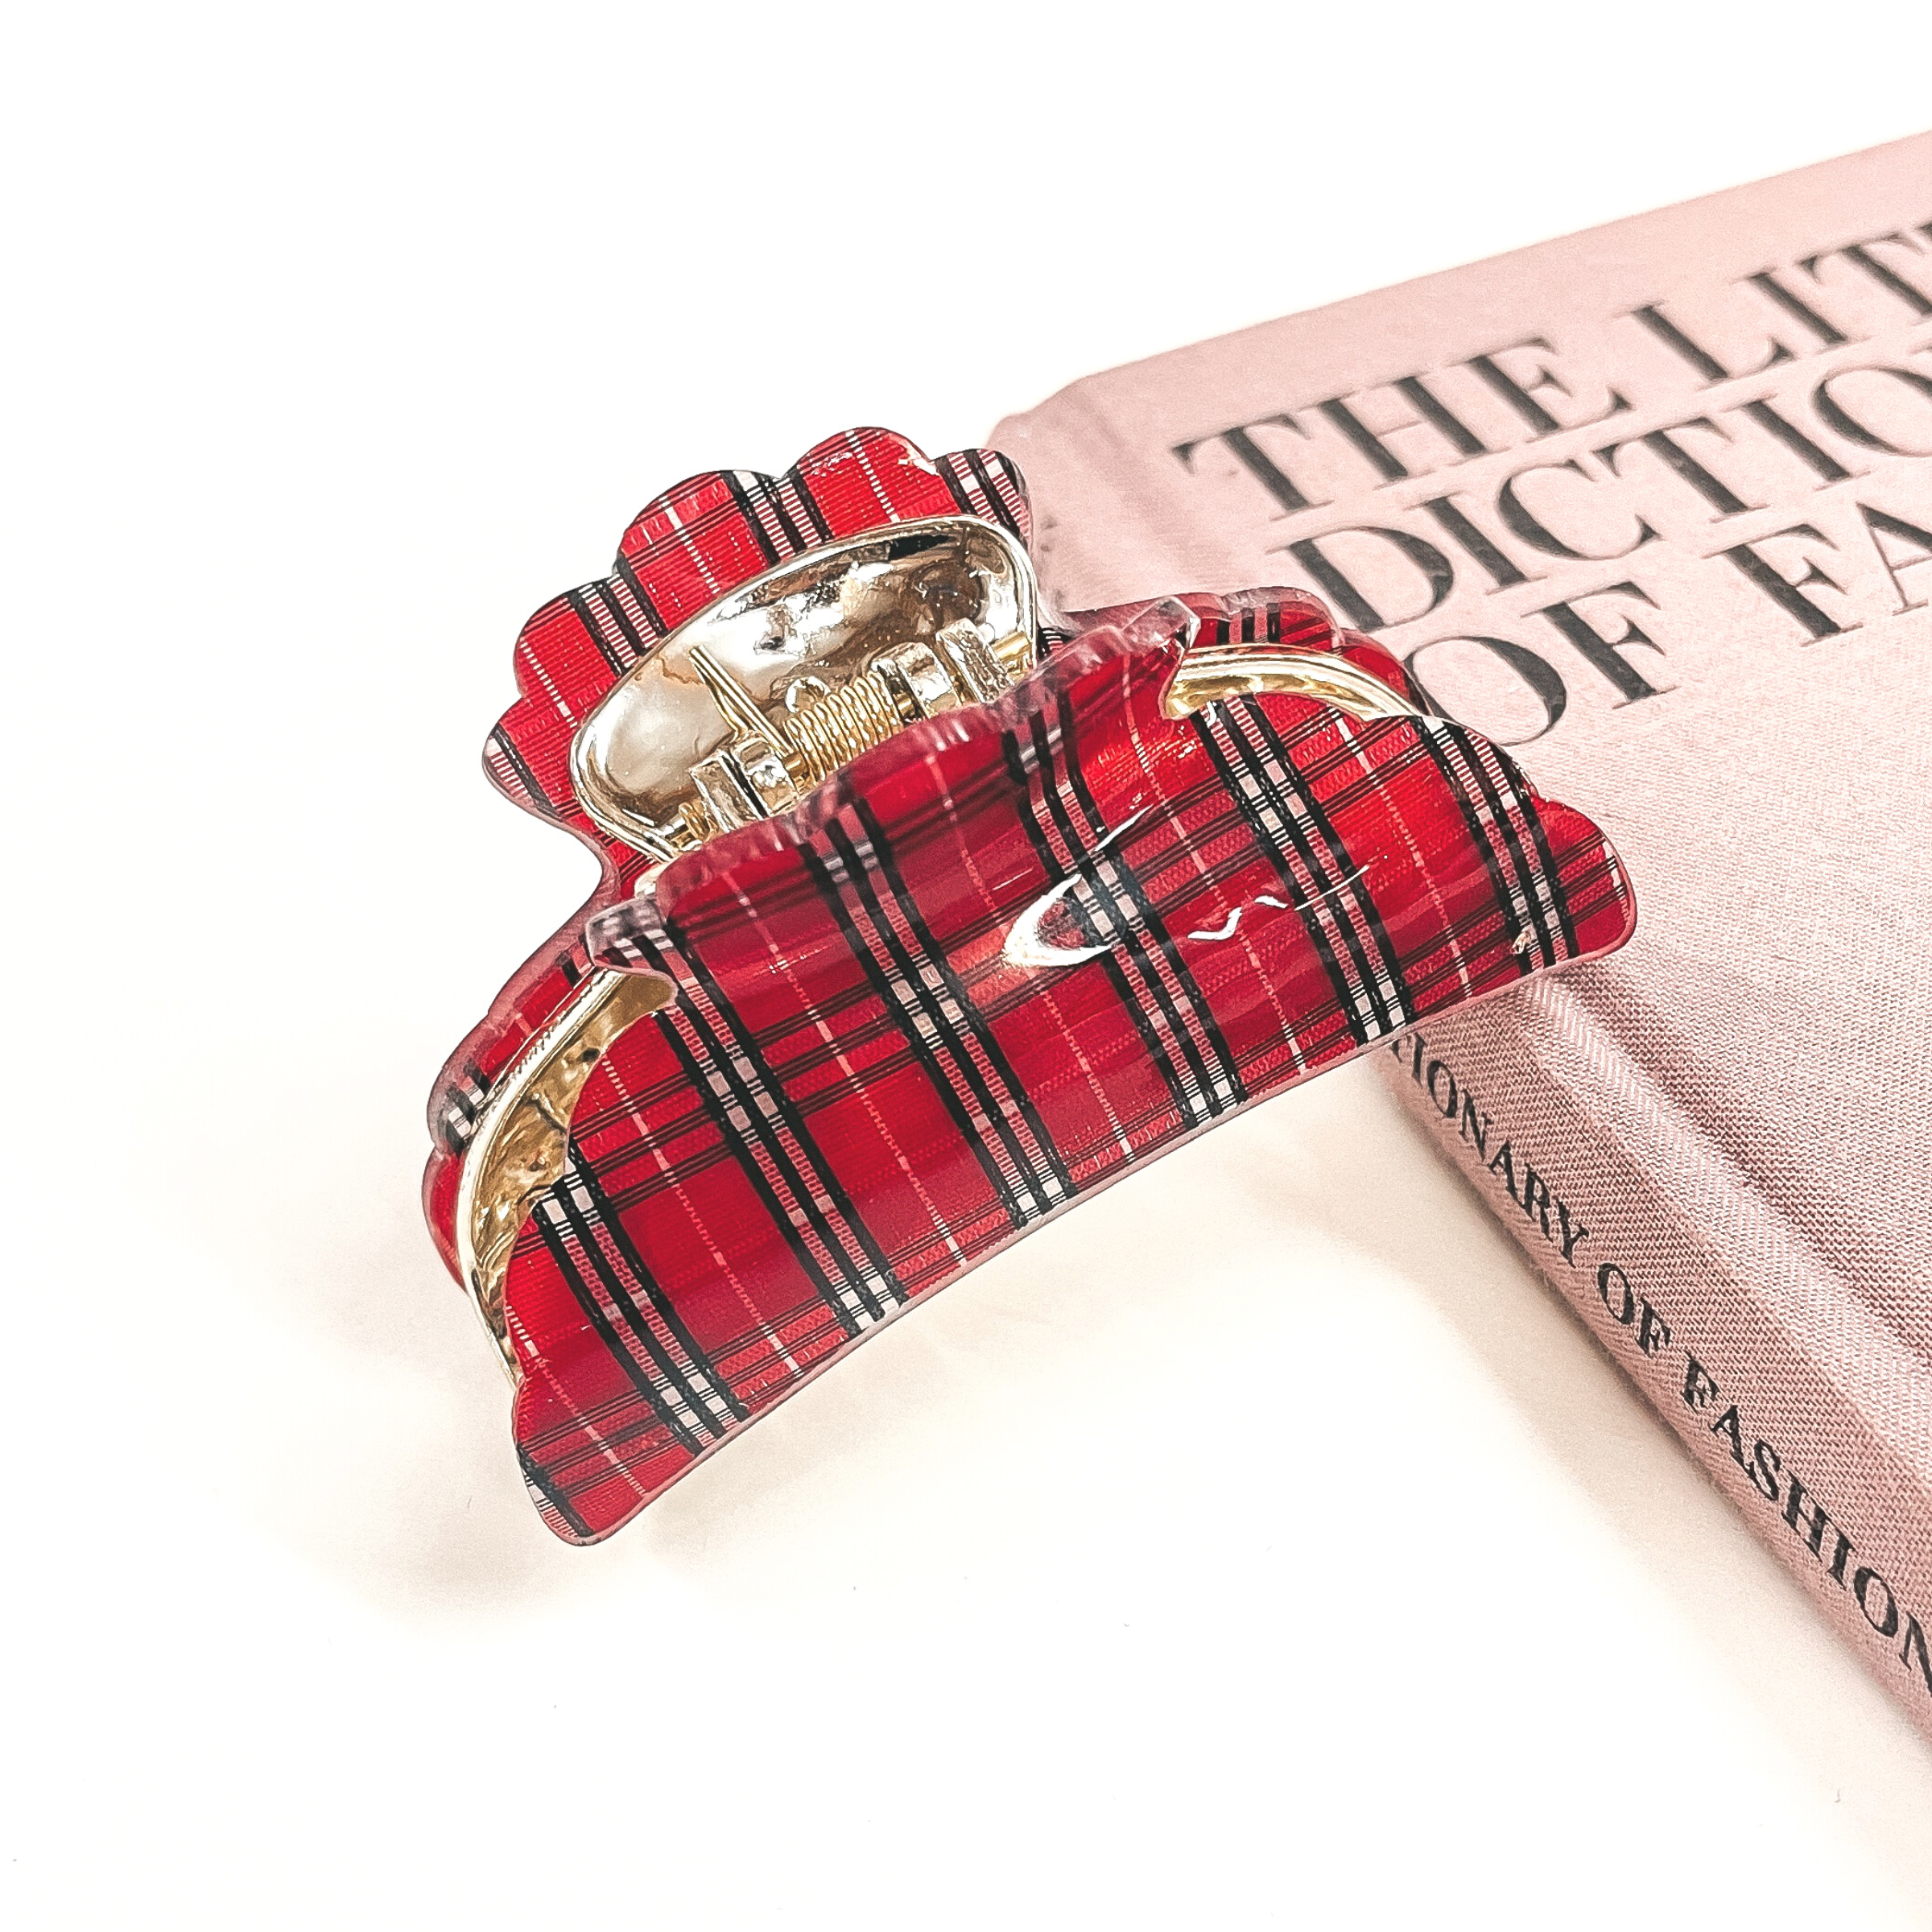 This is a gold and red plaid print hair clip laying on the side of a pink book and white background.